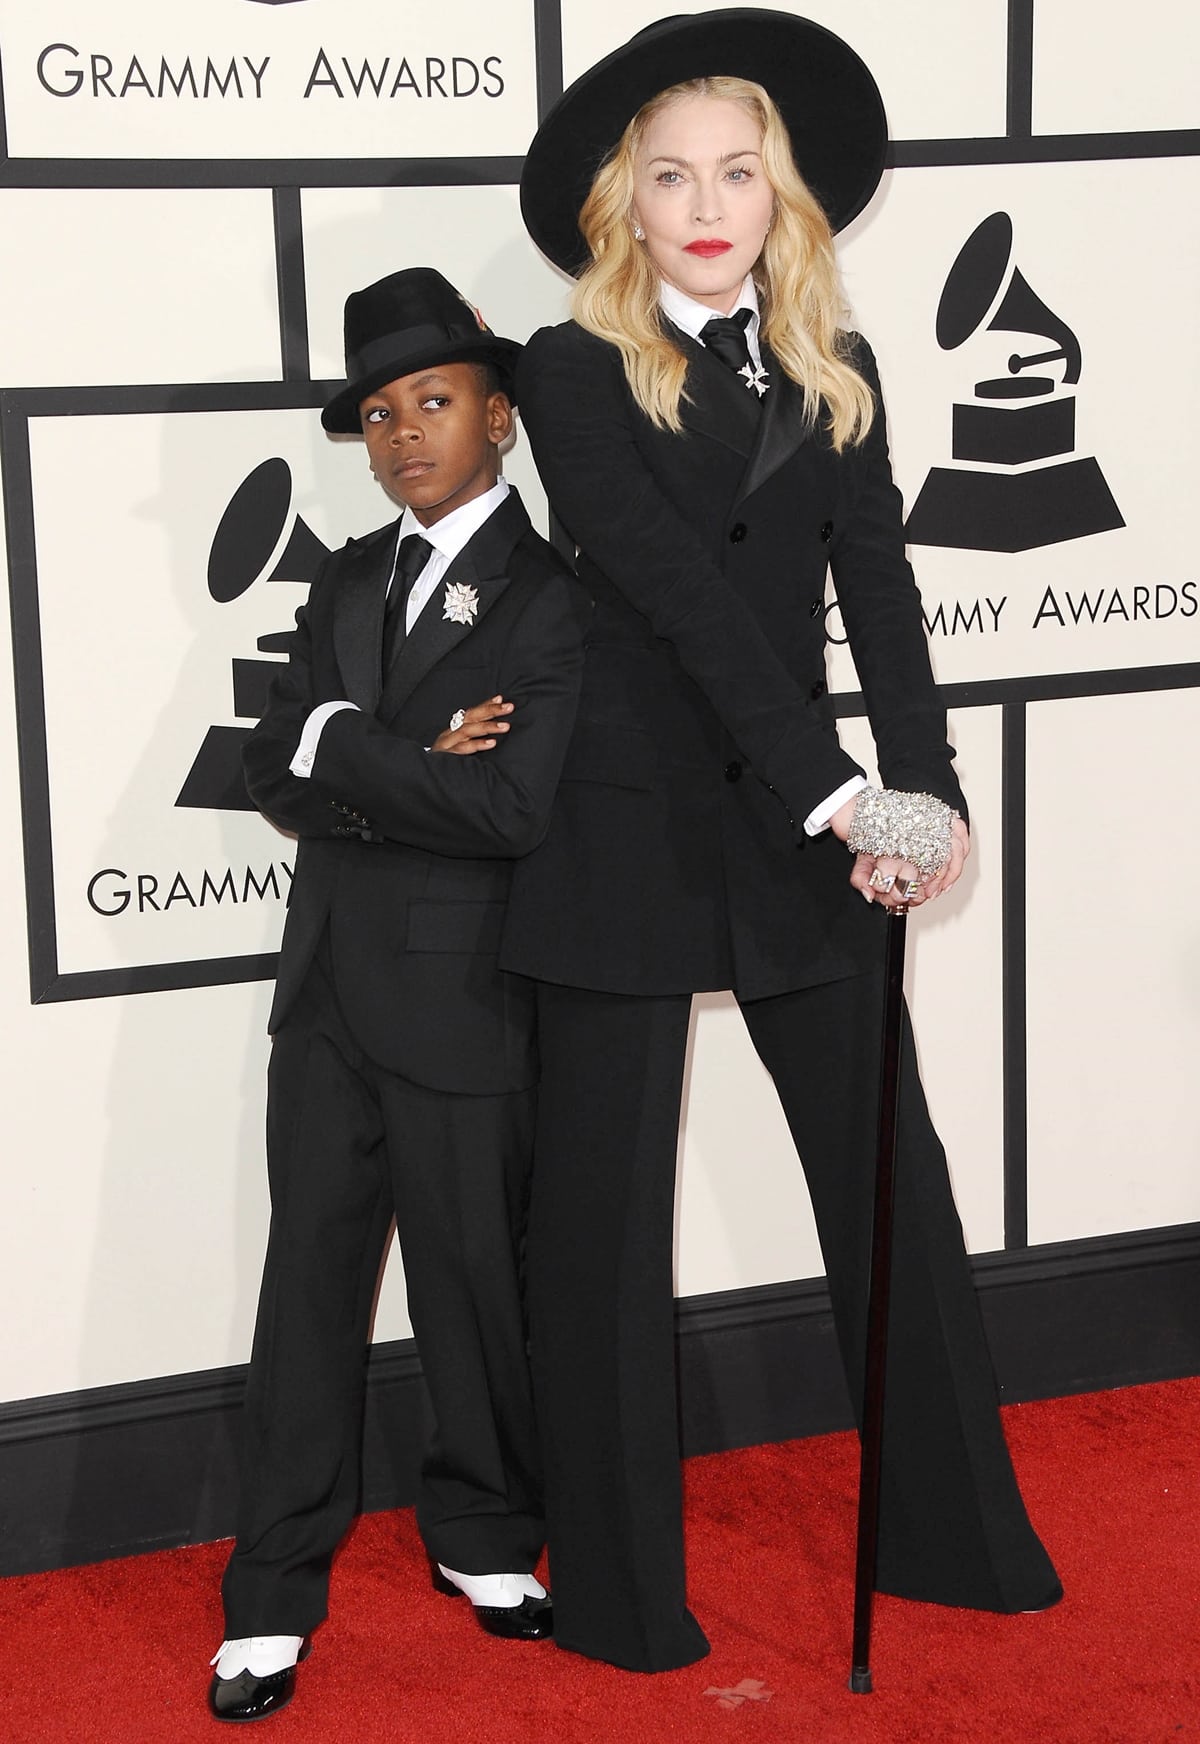 Madonna and her son, David Banda Mwale Ciccone Ritchie, dressed up as twins for the 56th GRAMMY Awards